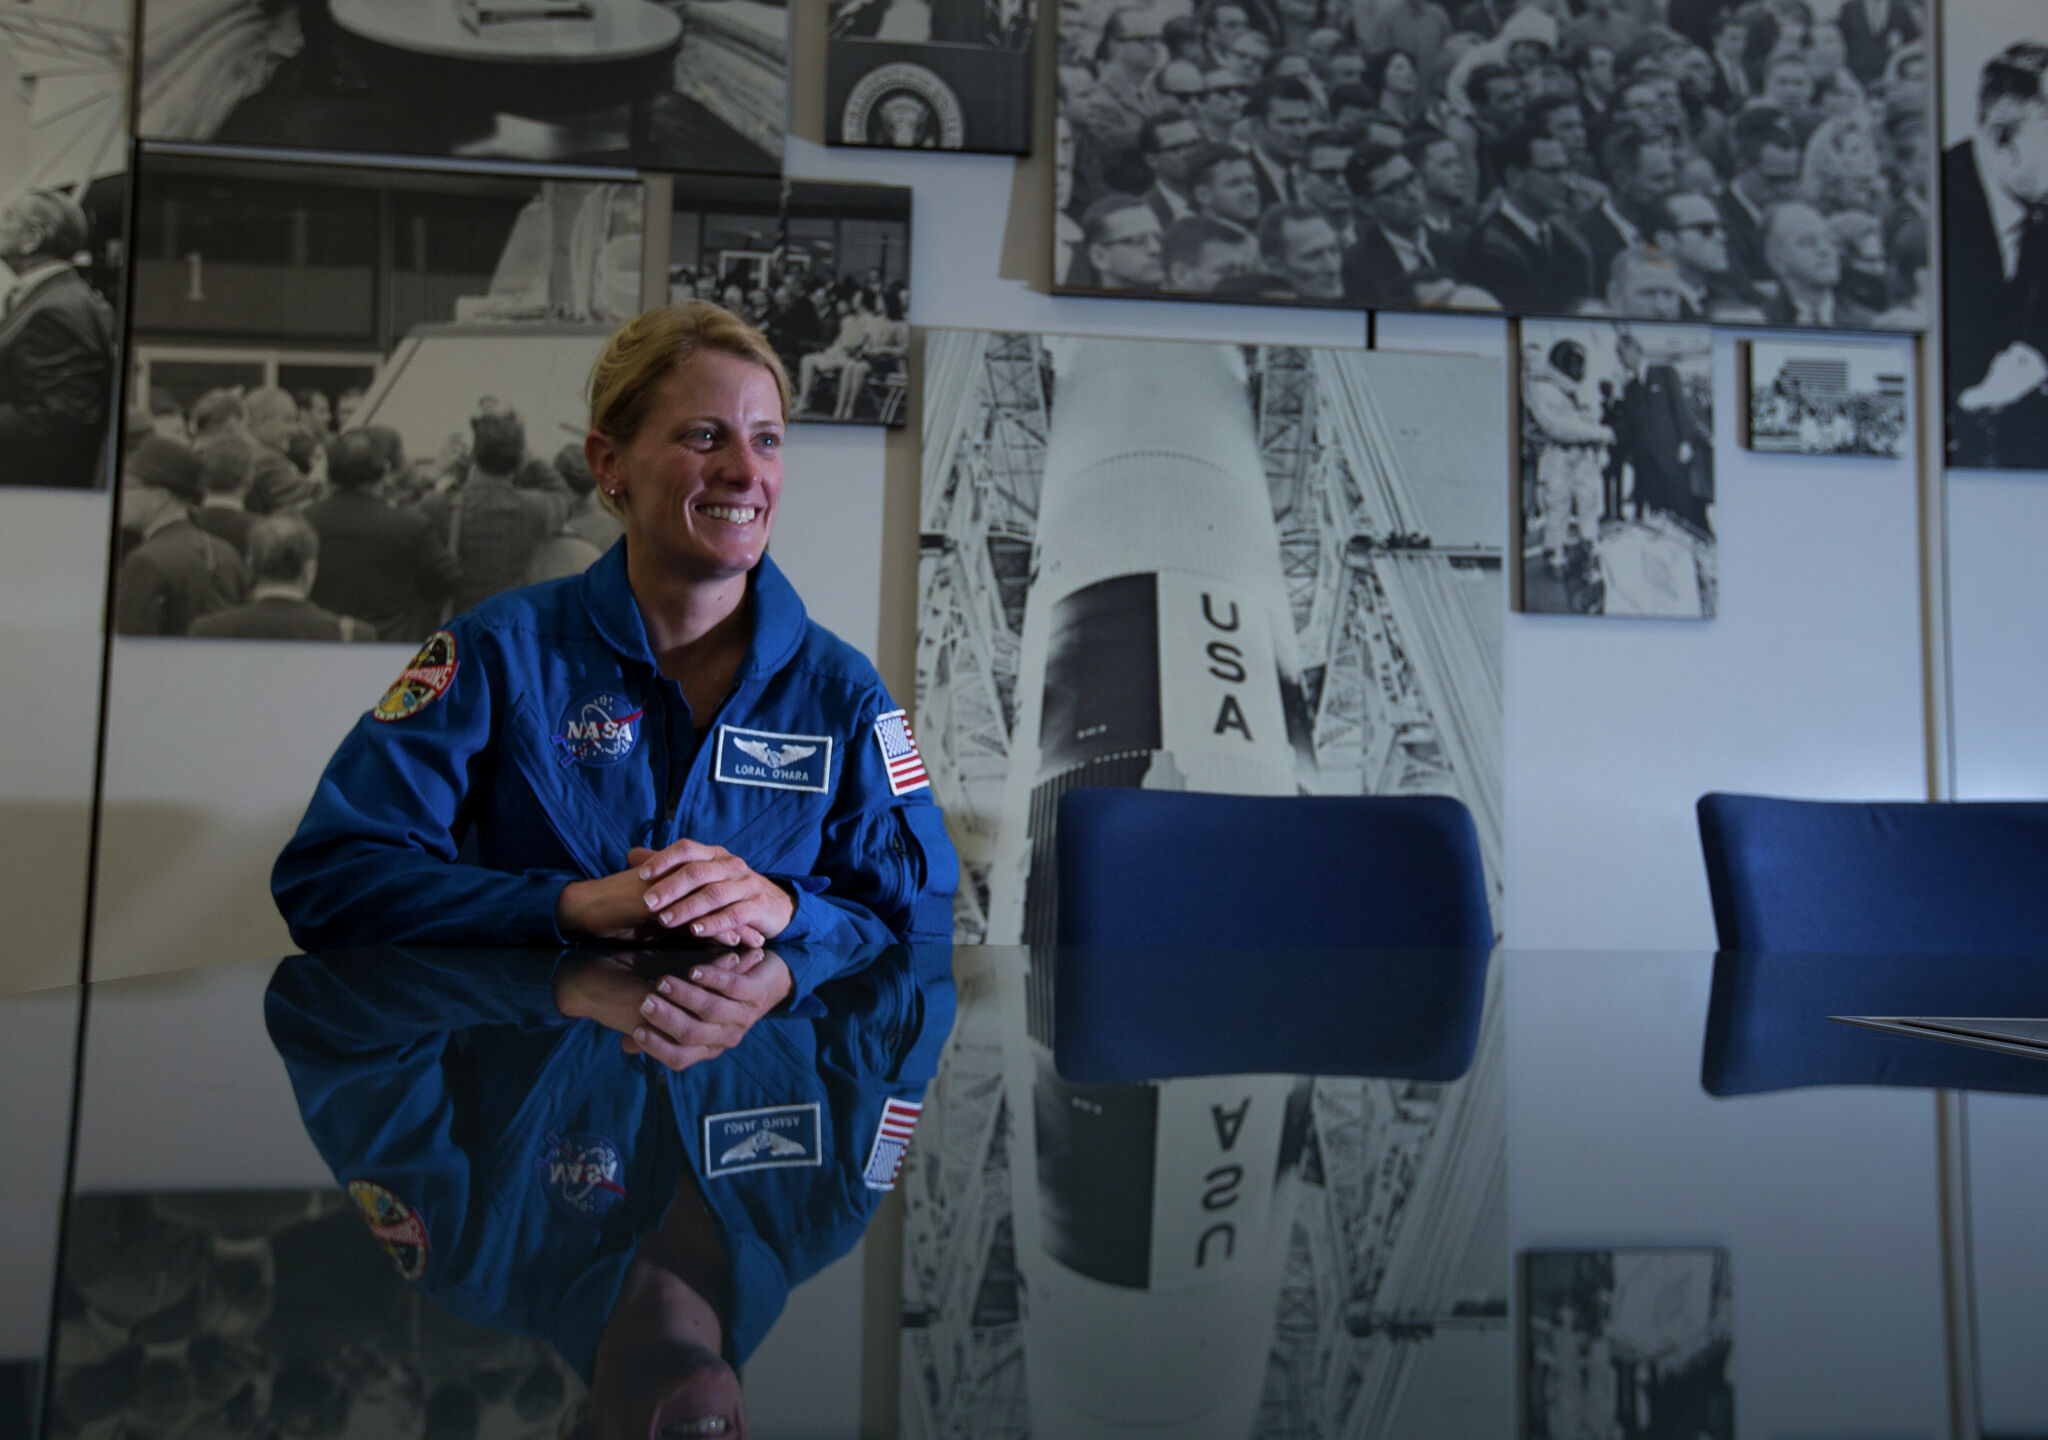 Loral O'Hara becomes NASA's second Houston native to launch into space